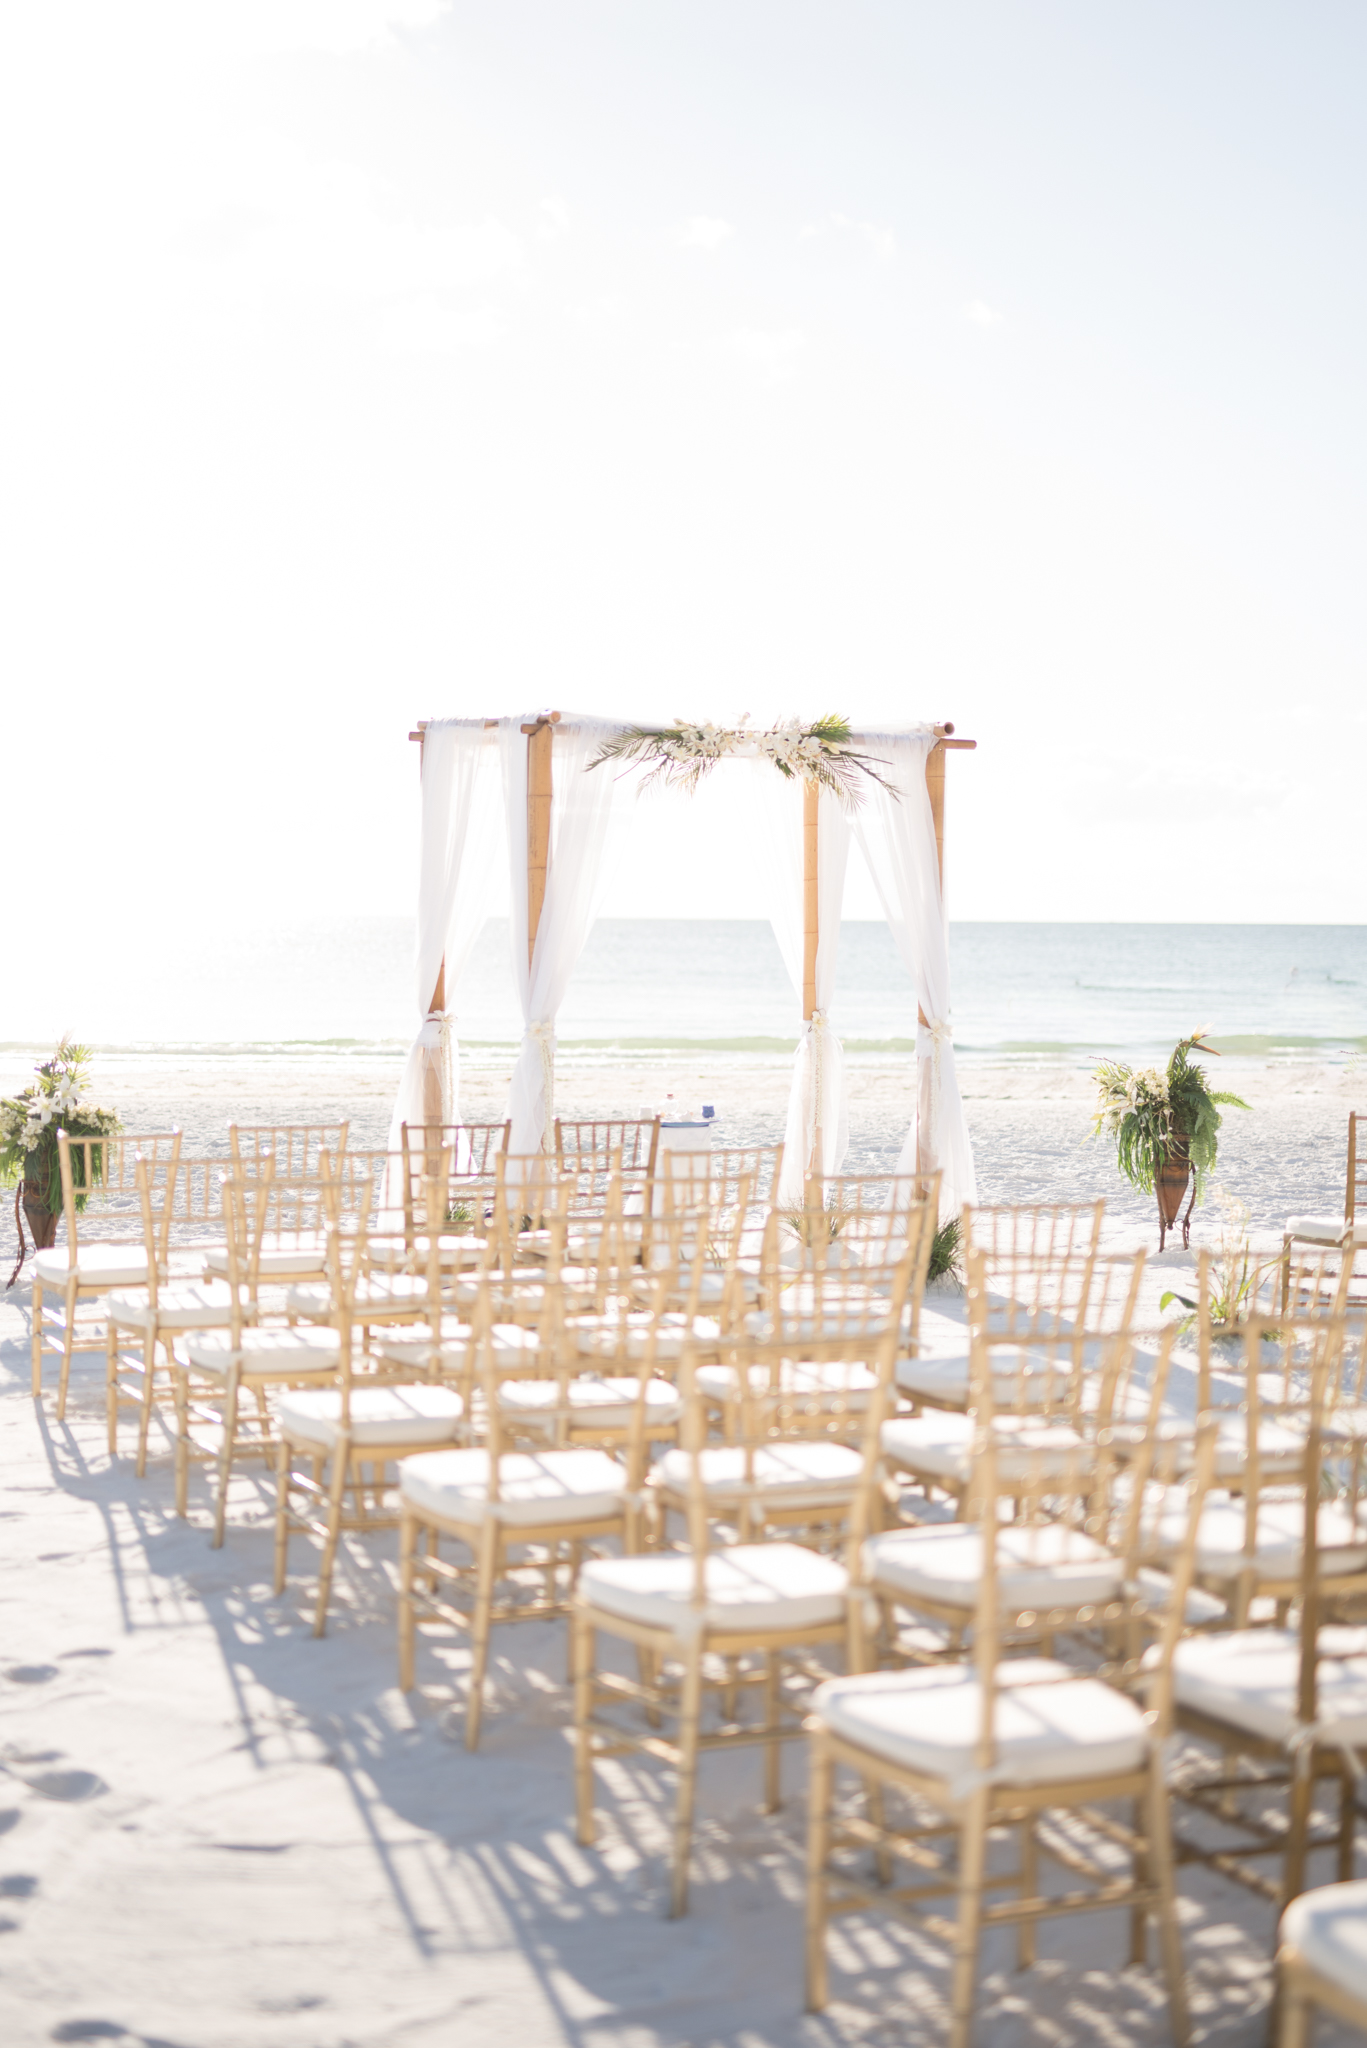 Ceremony site with empty chairs.